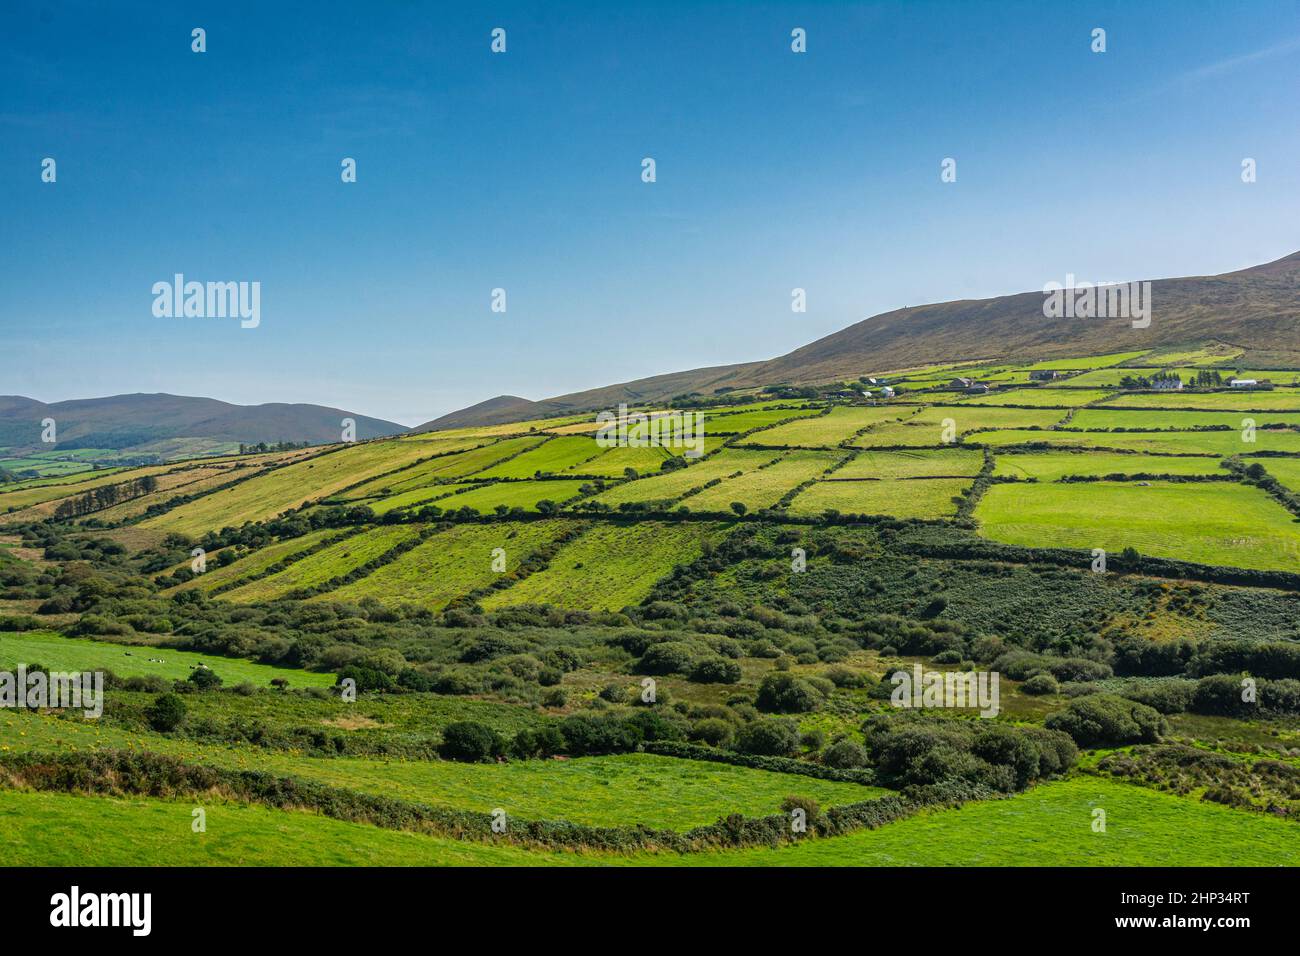 View of the fields from the N86 road on the way to Dingle, South West Ireland Stock Photo